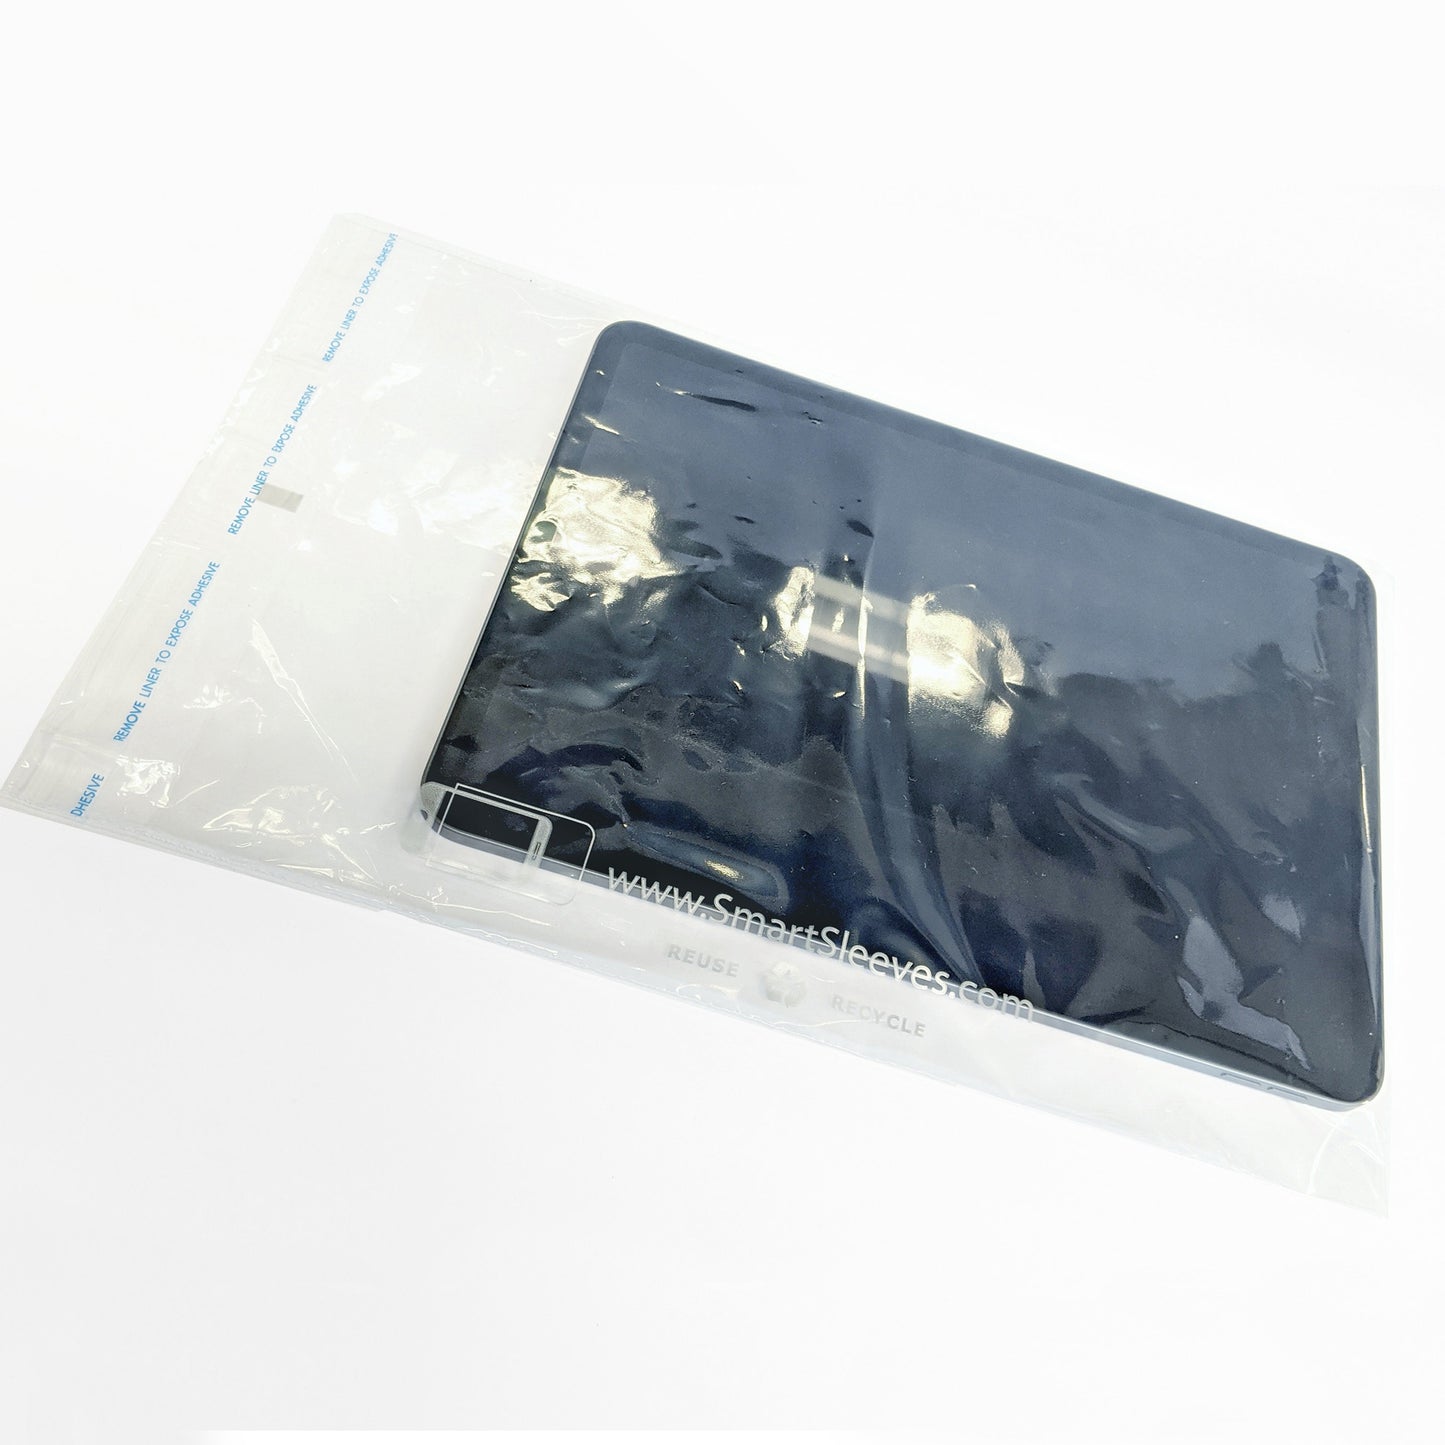 ClearBags Antimicrobial SmartSleeves for Tablets - XLarge (250pcs) - 15-07388